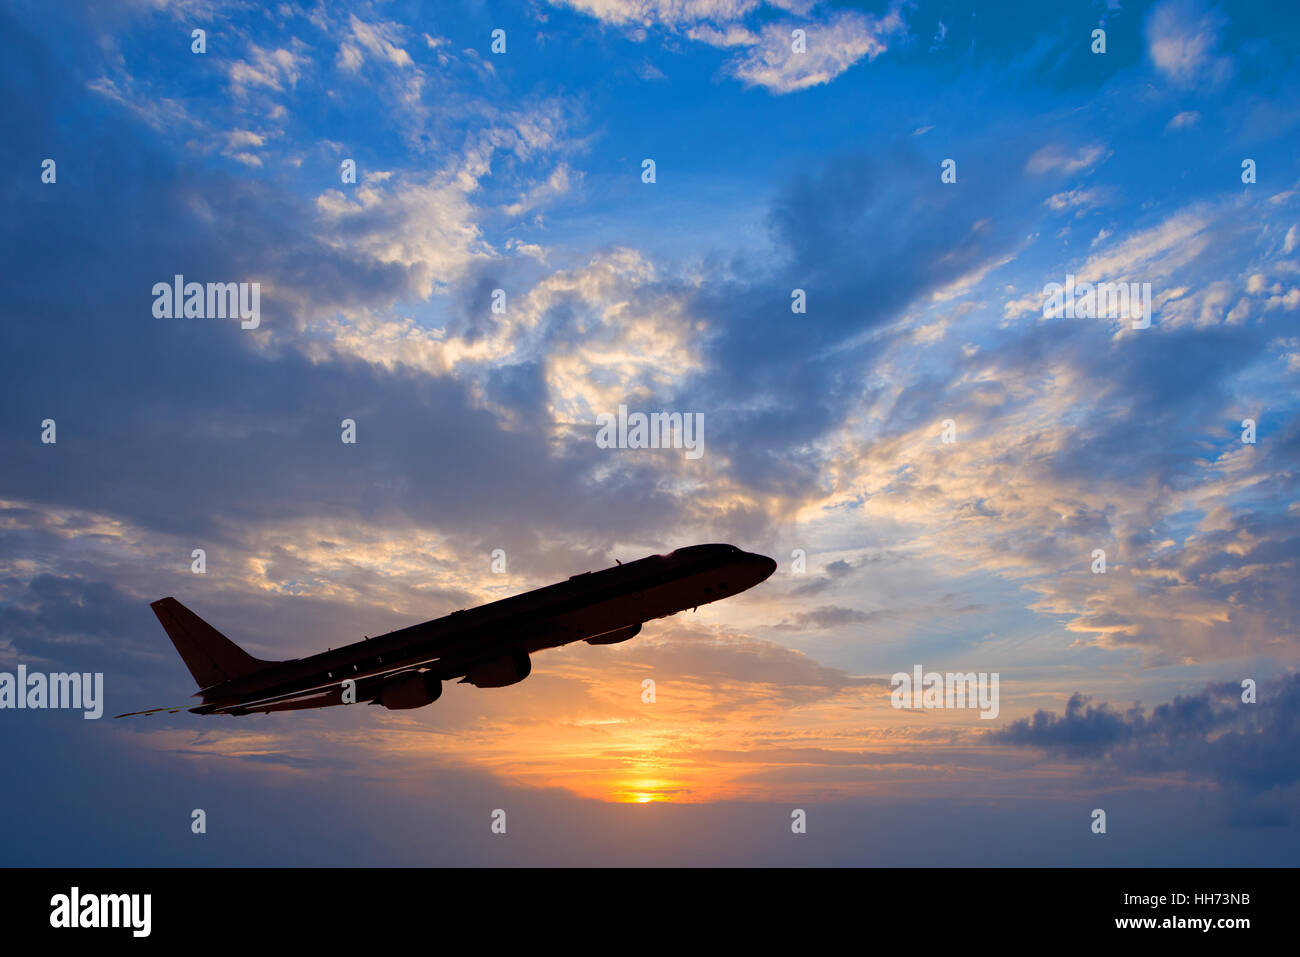 Silhouette of an airplane taking off, sunset background Stock Photo